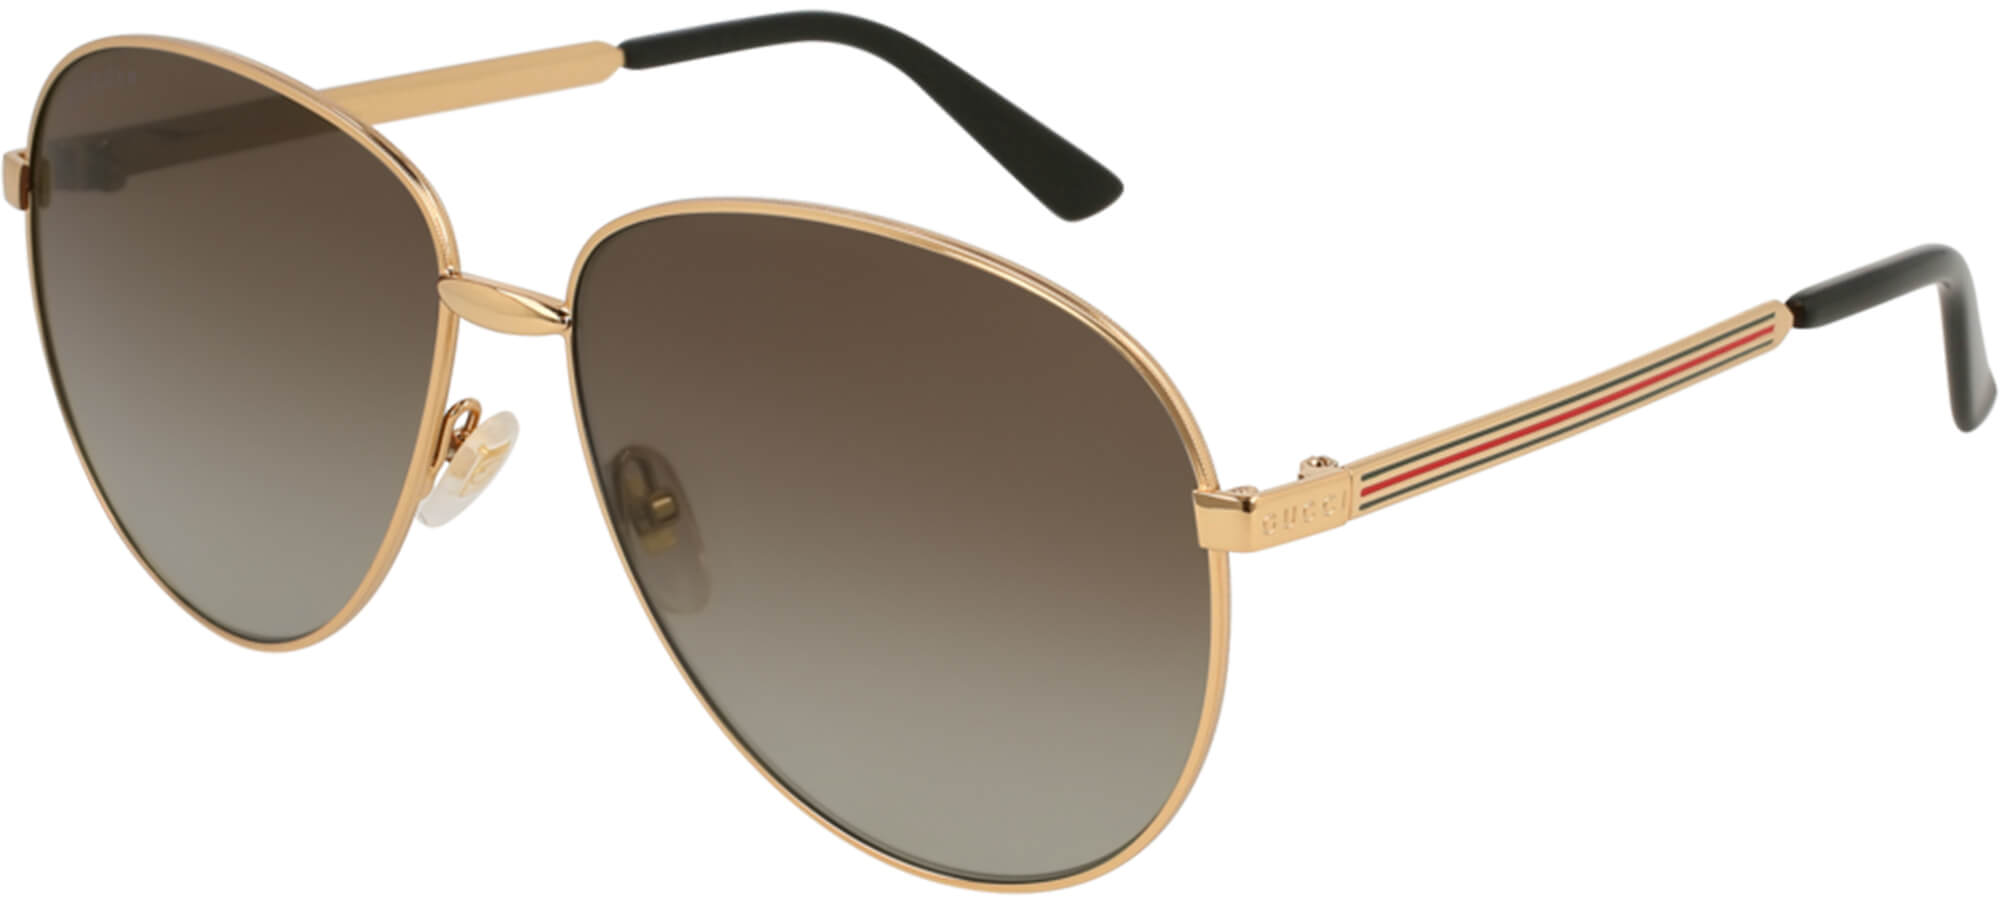 GucciGG0138SGold/brown Shaded (005 WE)